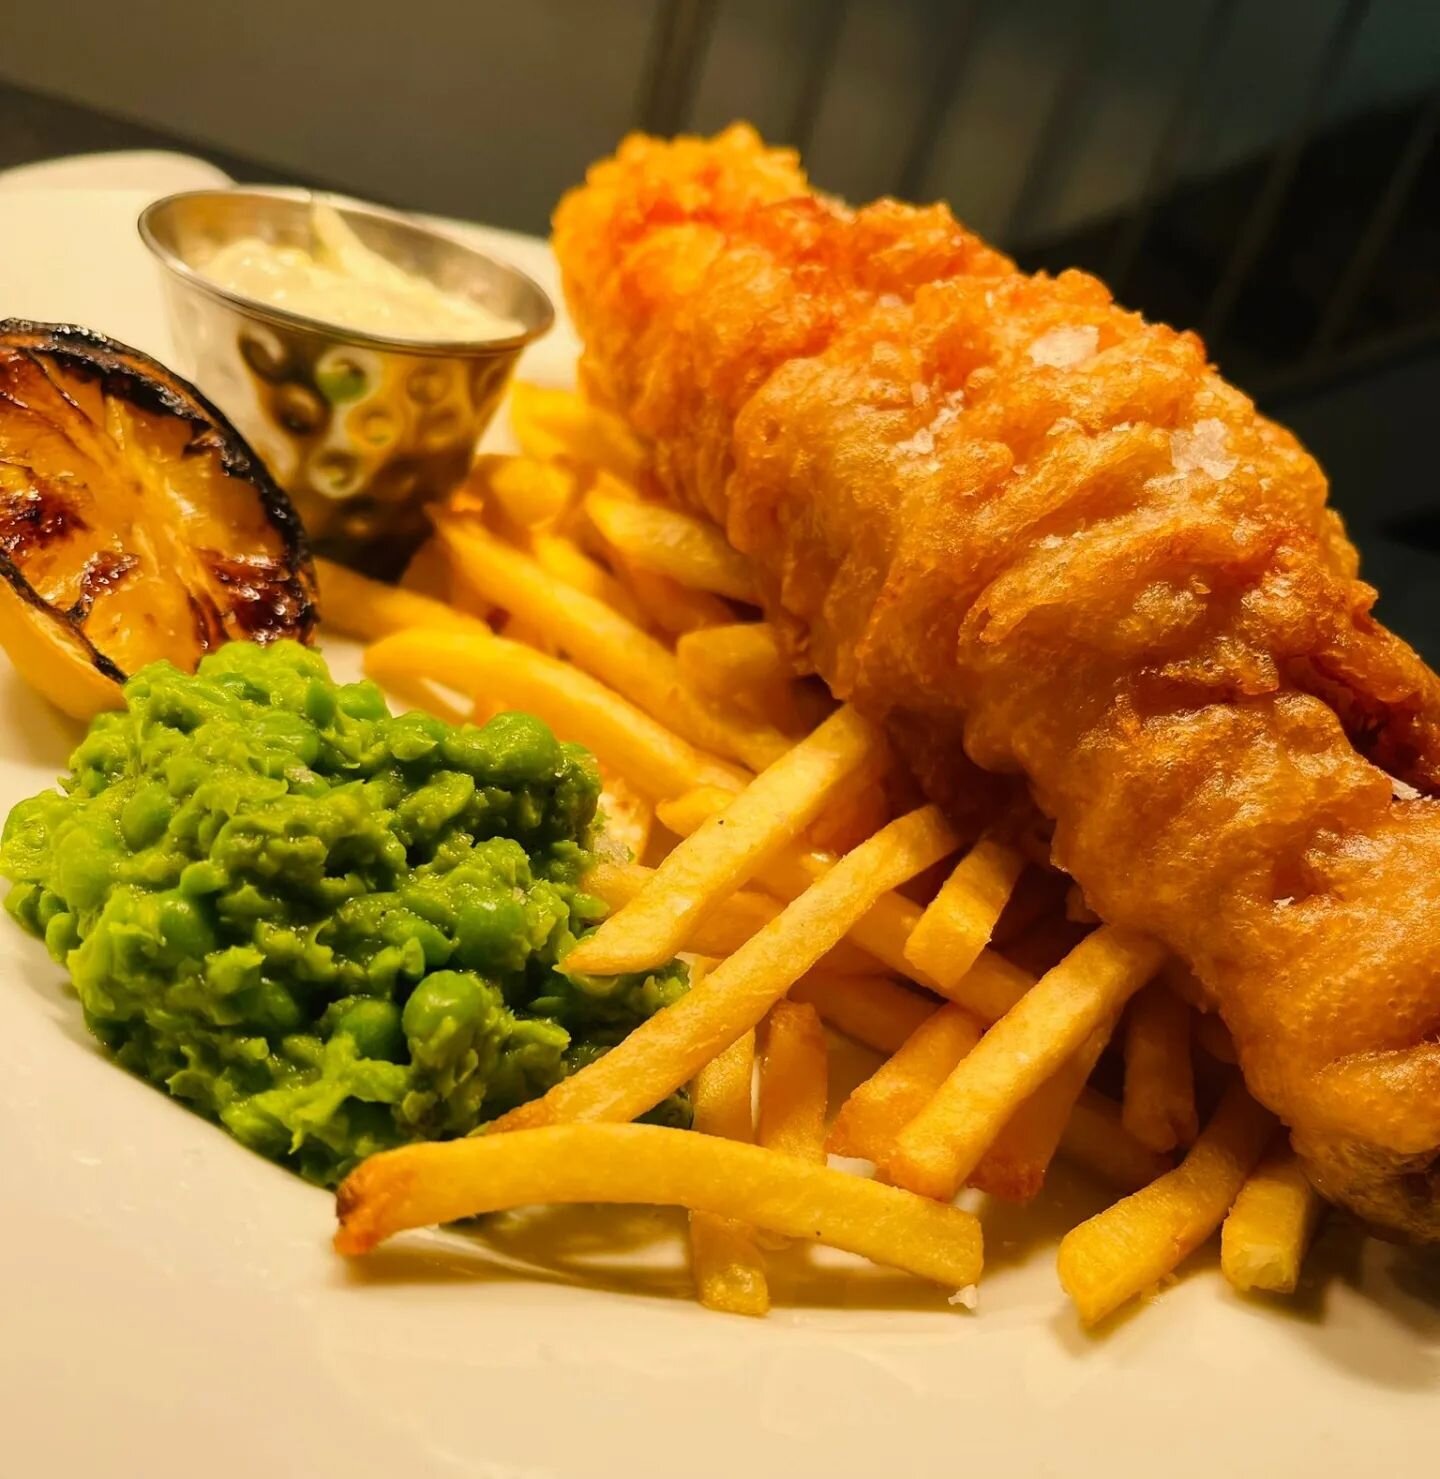 Fish Friday is back from TODAY! On the menu: fish &amp; chips, mushy peas, tartare sauce 🙌🐟 

Expect fish dish specials every Friday using only the freshest fish from the market. BOOK via the link in our bio!